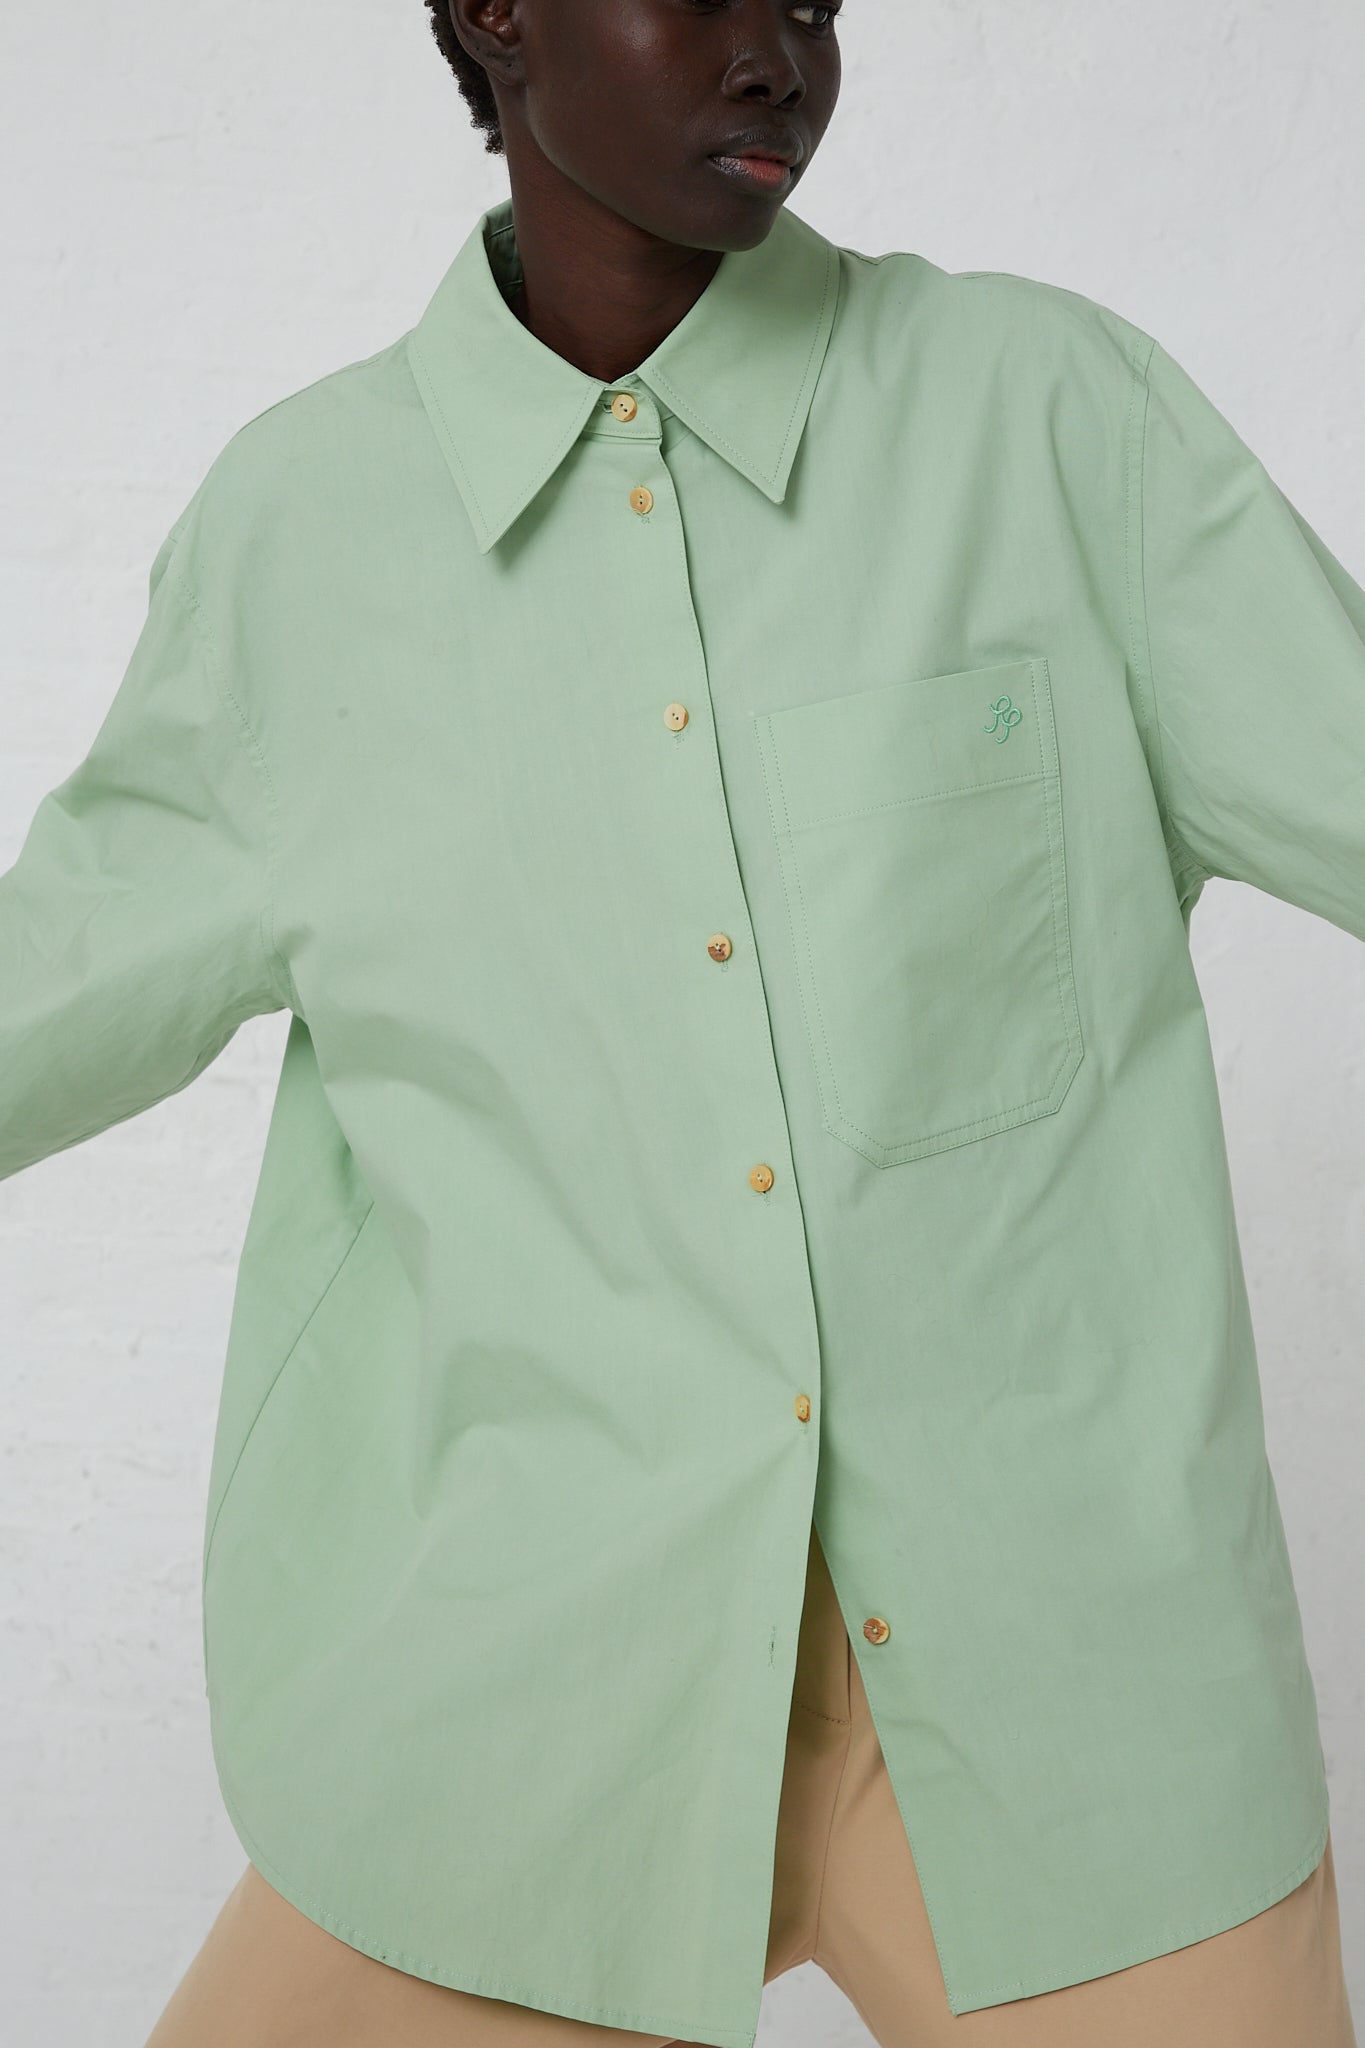 A woman wearing a Rejina Pyo Organic Cotton Caprice Shirt in Mint with a front button closure.